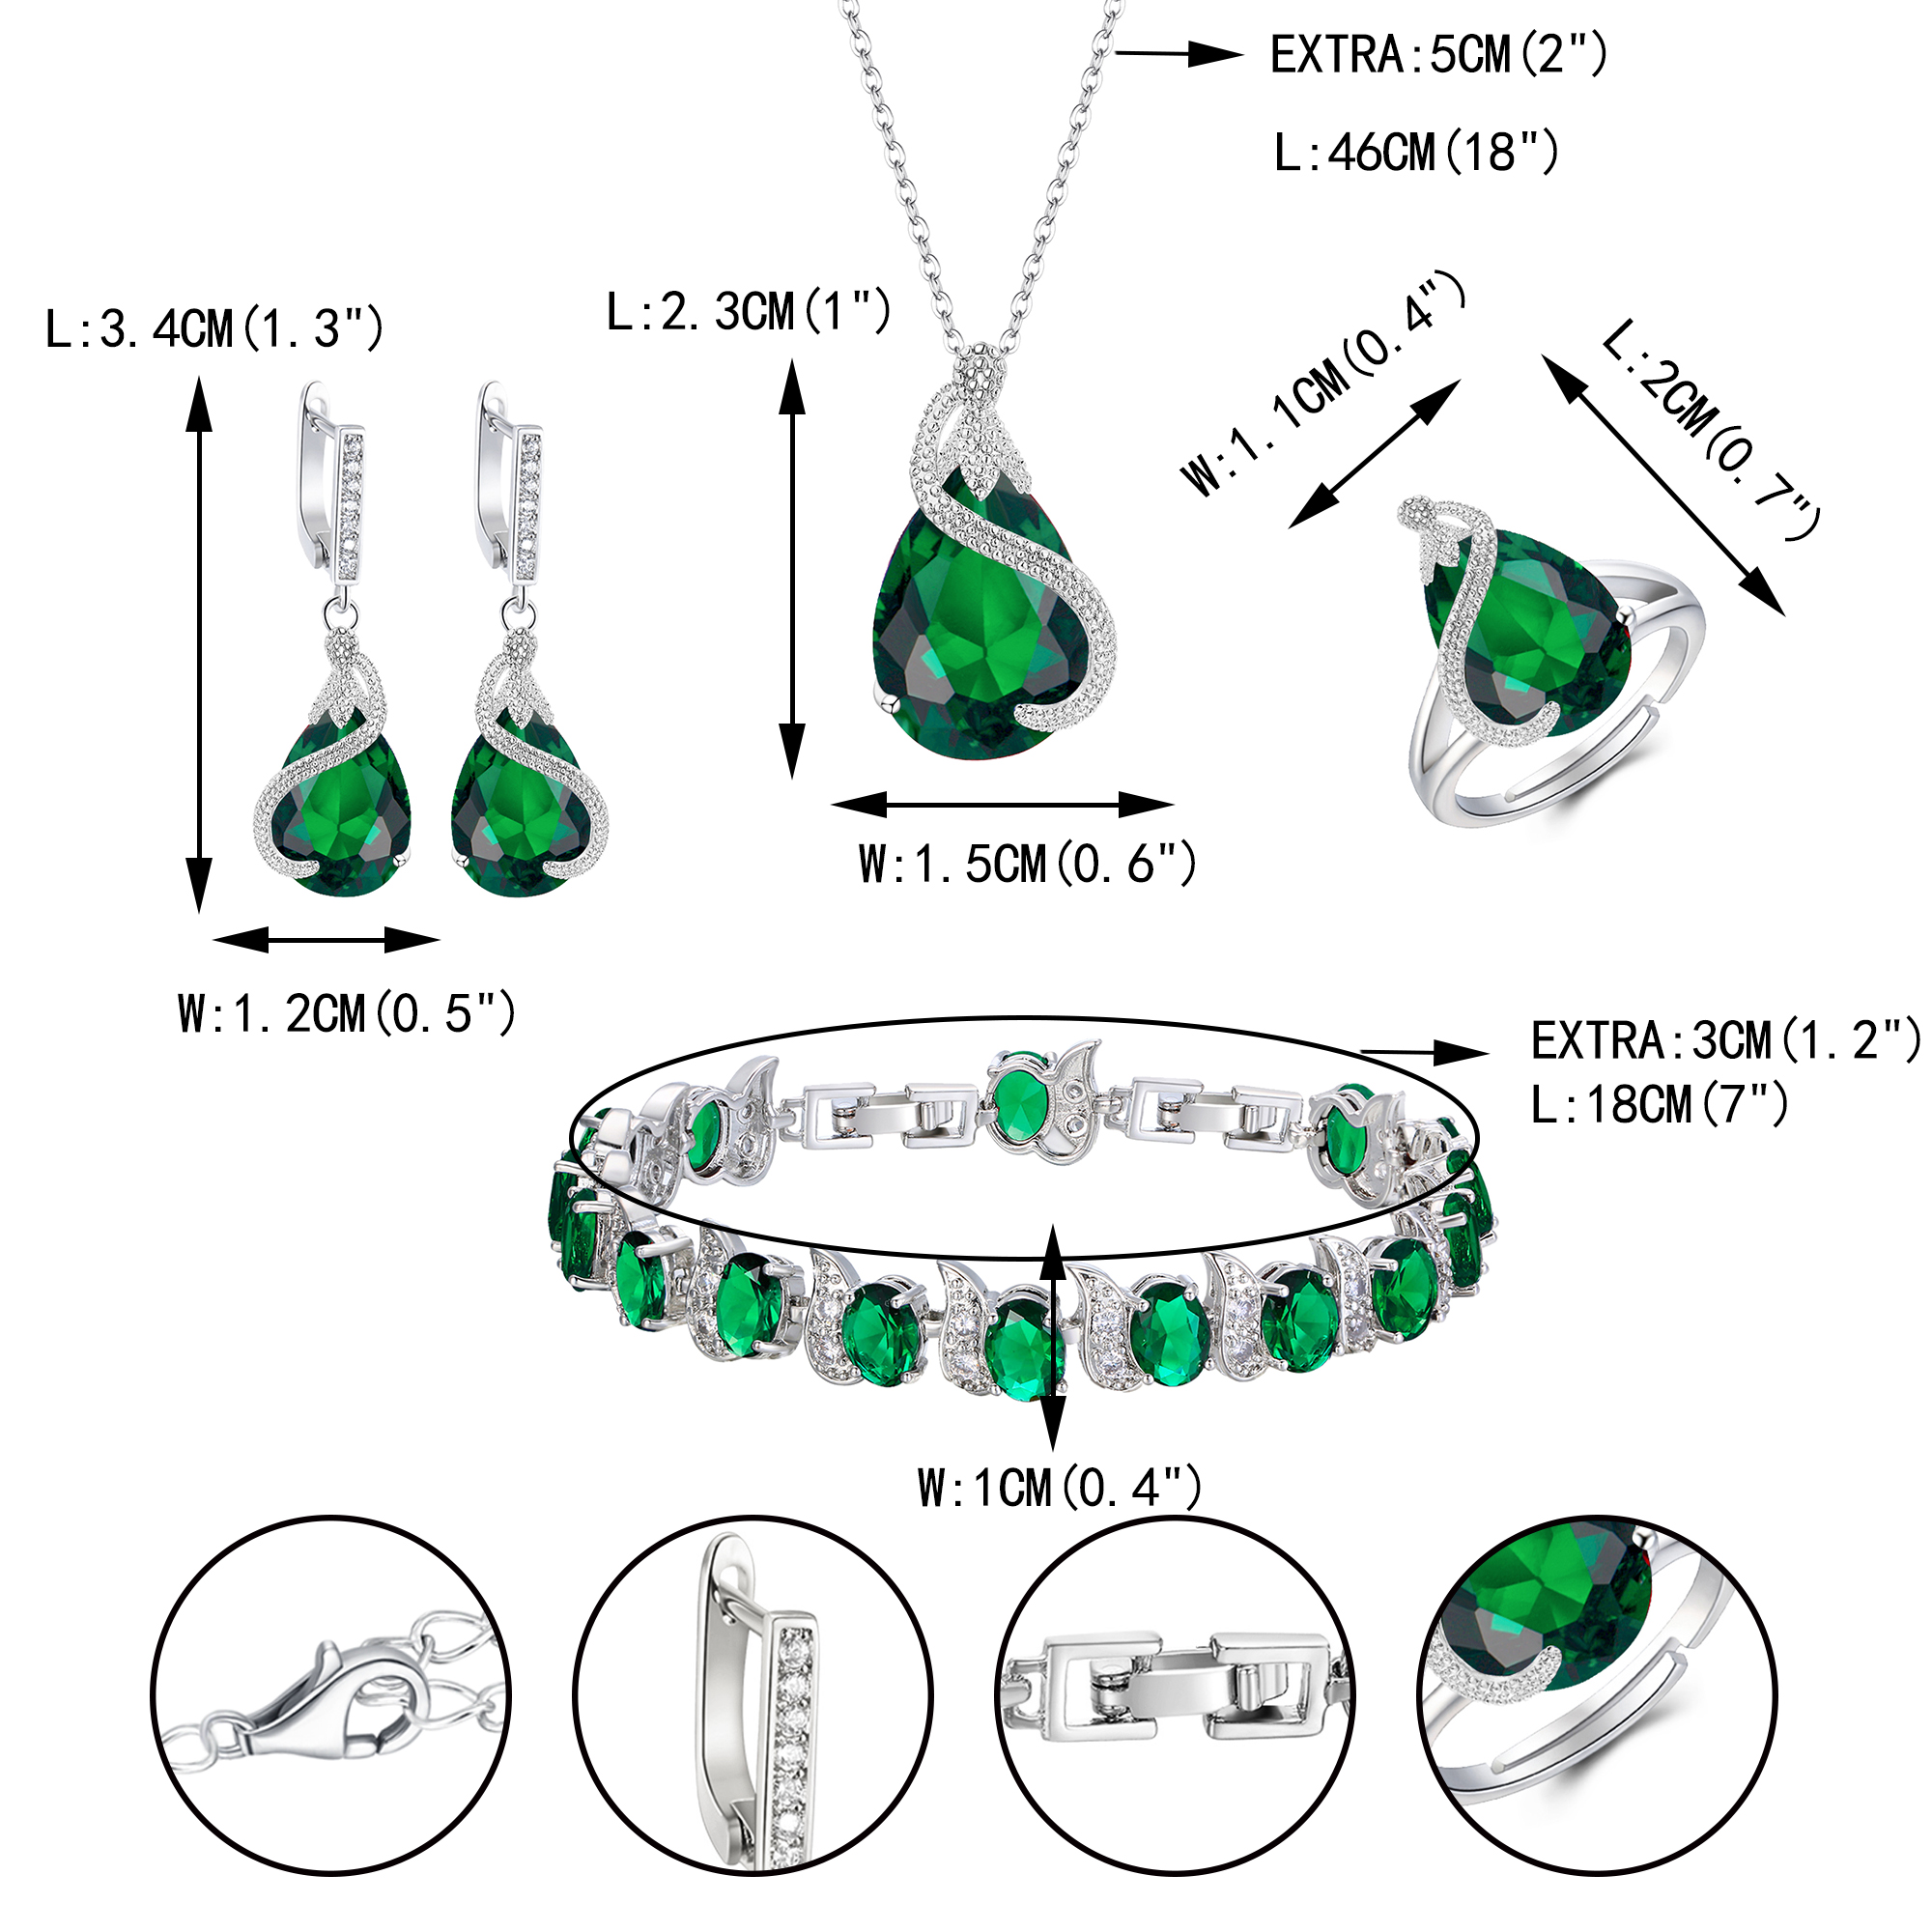 Wedure Women Bridal Jewelry Set for Bride, Emerald Birthstone CZ Necklace Earrings Bracelet Ring Sets for Birthday/Mother's Day Gifts for Women Green Silver-Tone - image 5 of 5